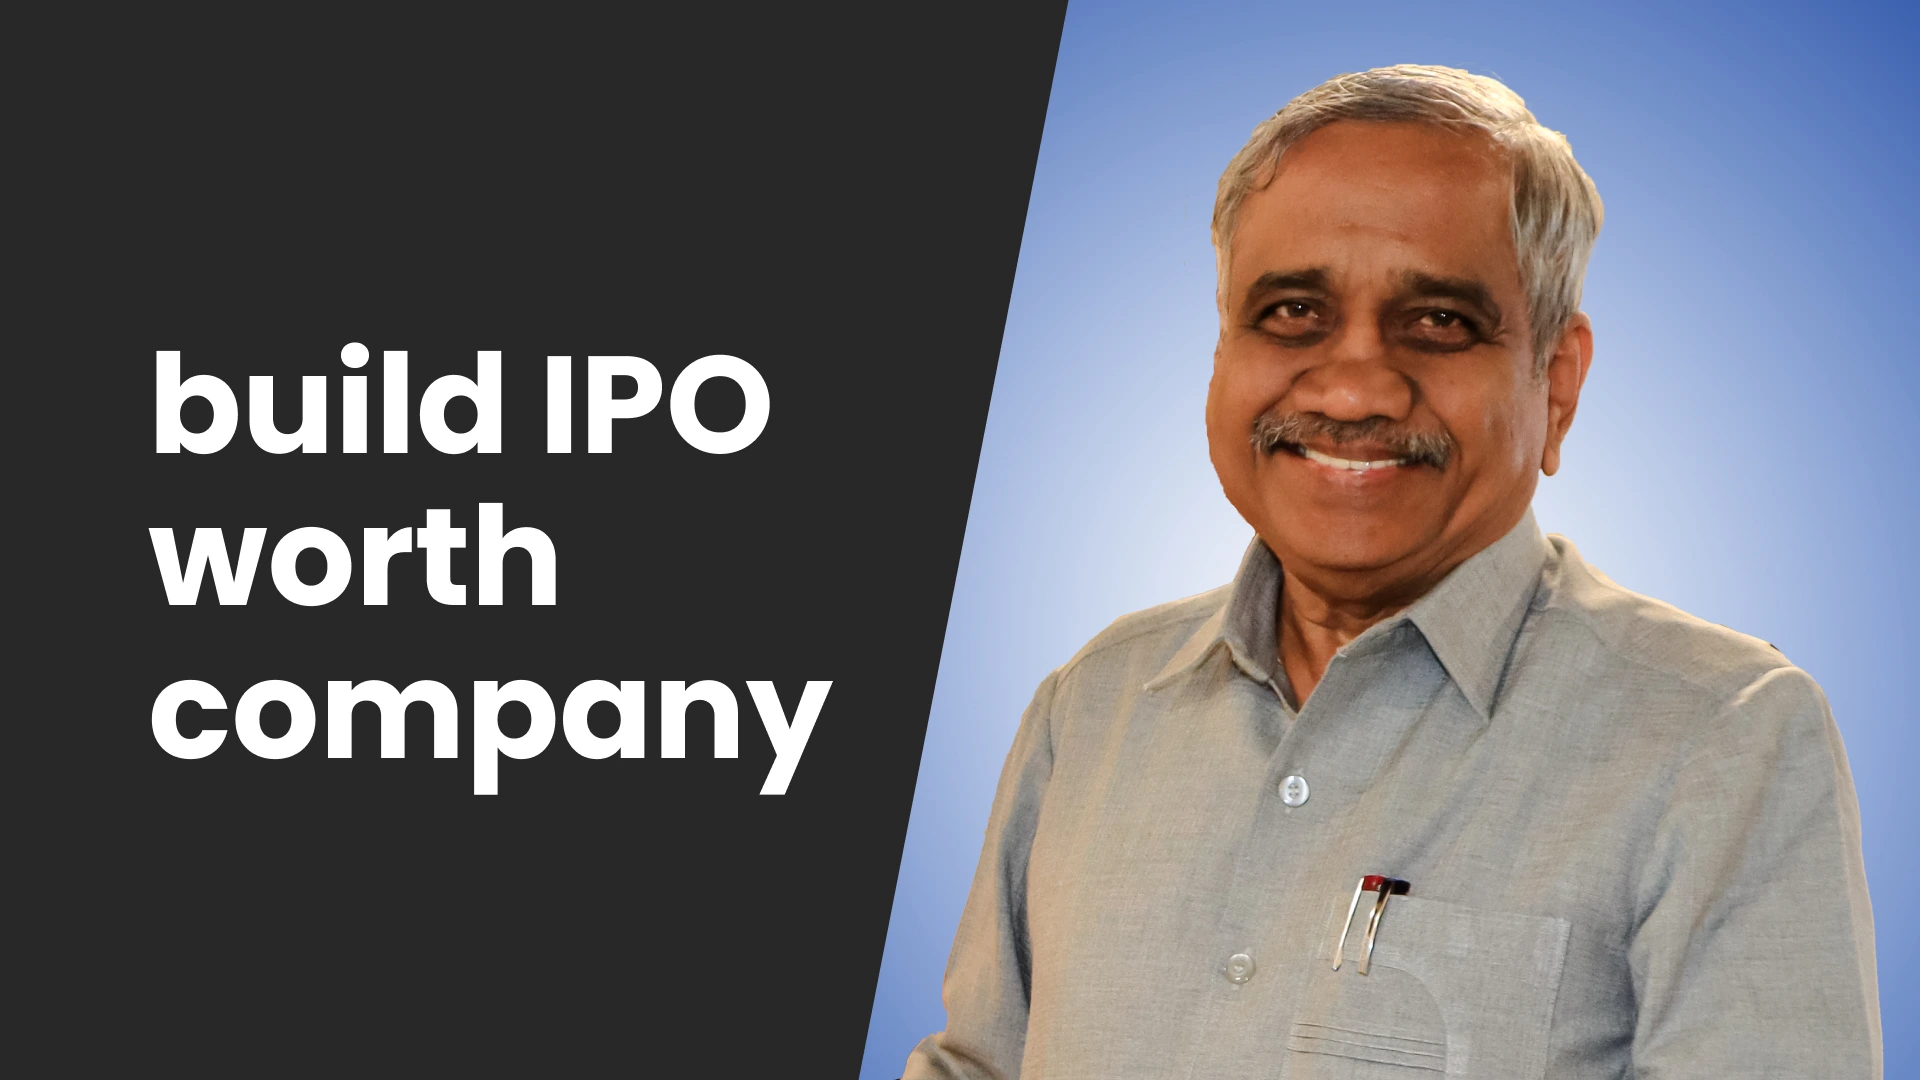 How To Build an IPO Worth logistics company? - Online course on ffreedom app